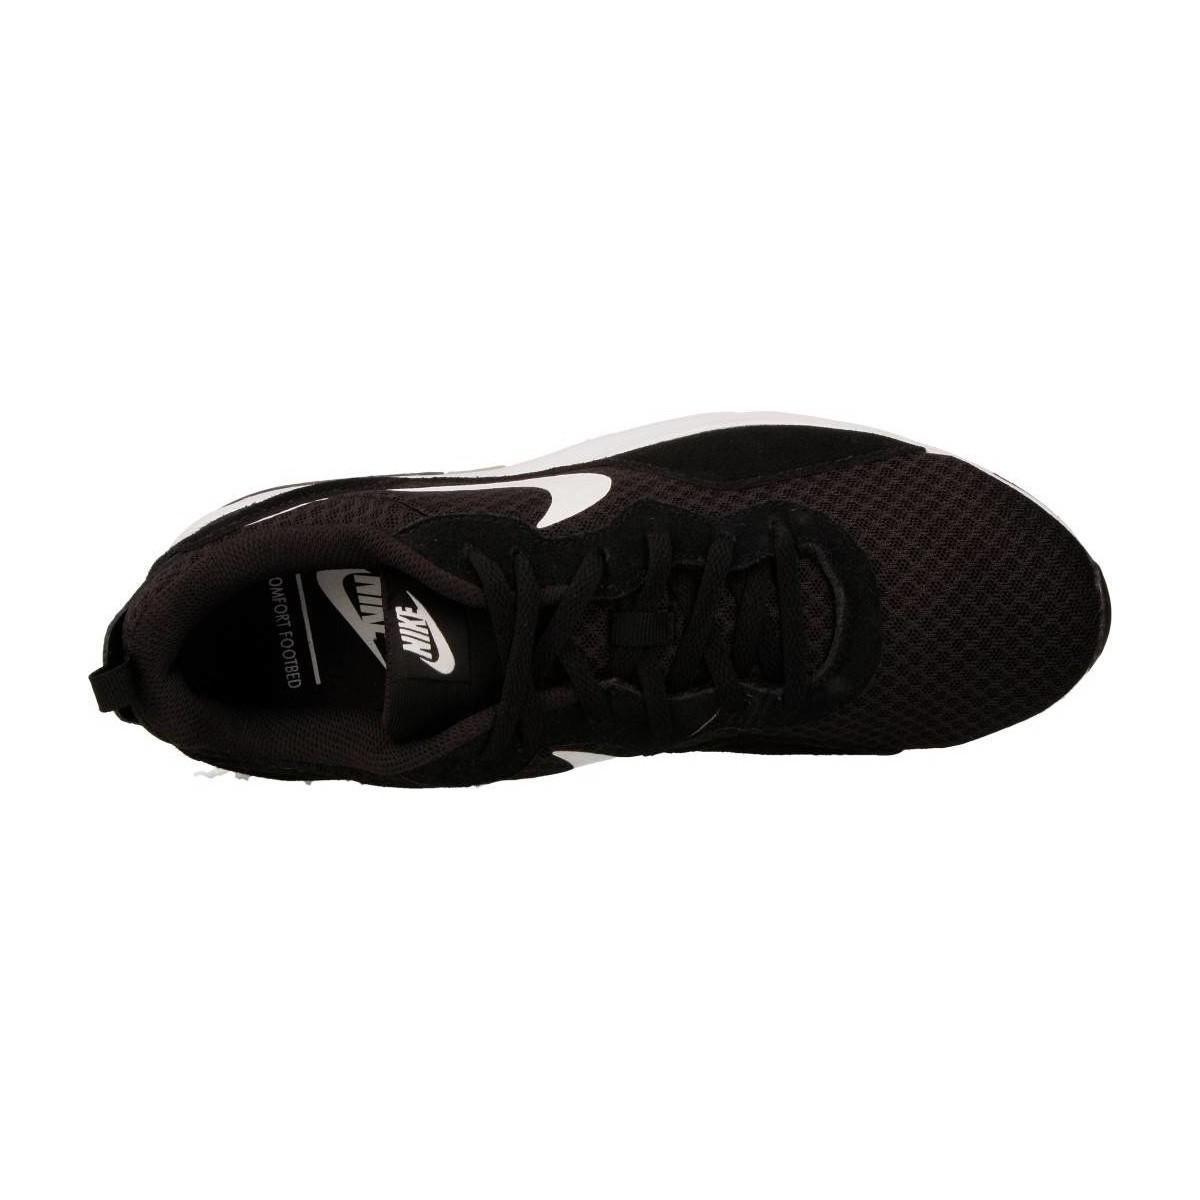 Nike Ld Runner Women's Shoes (trainers) In Black - Lyst